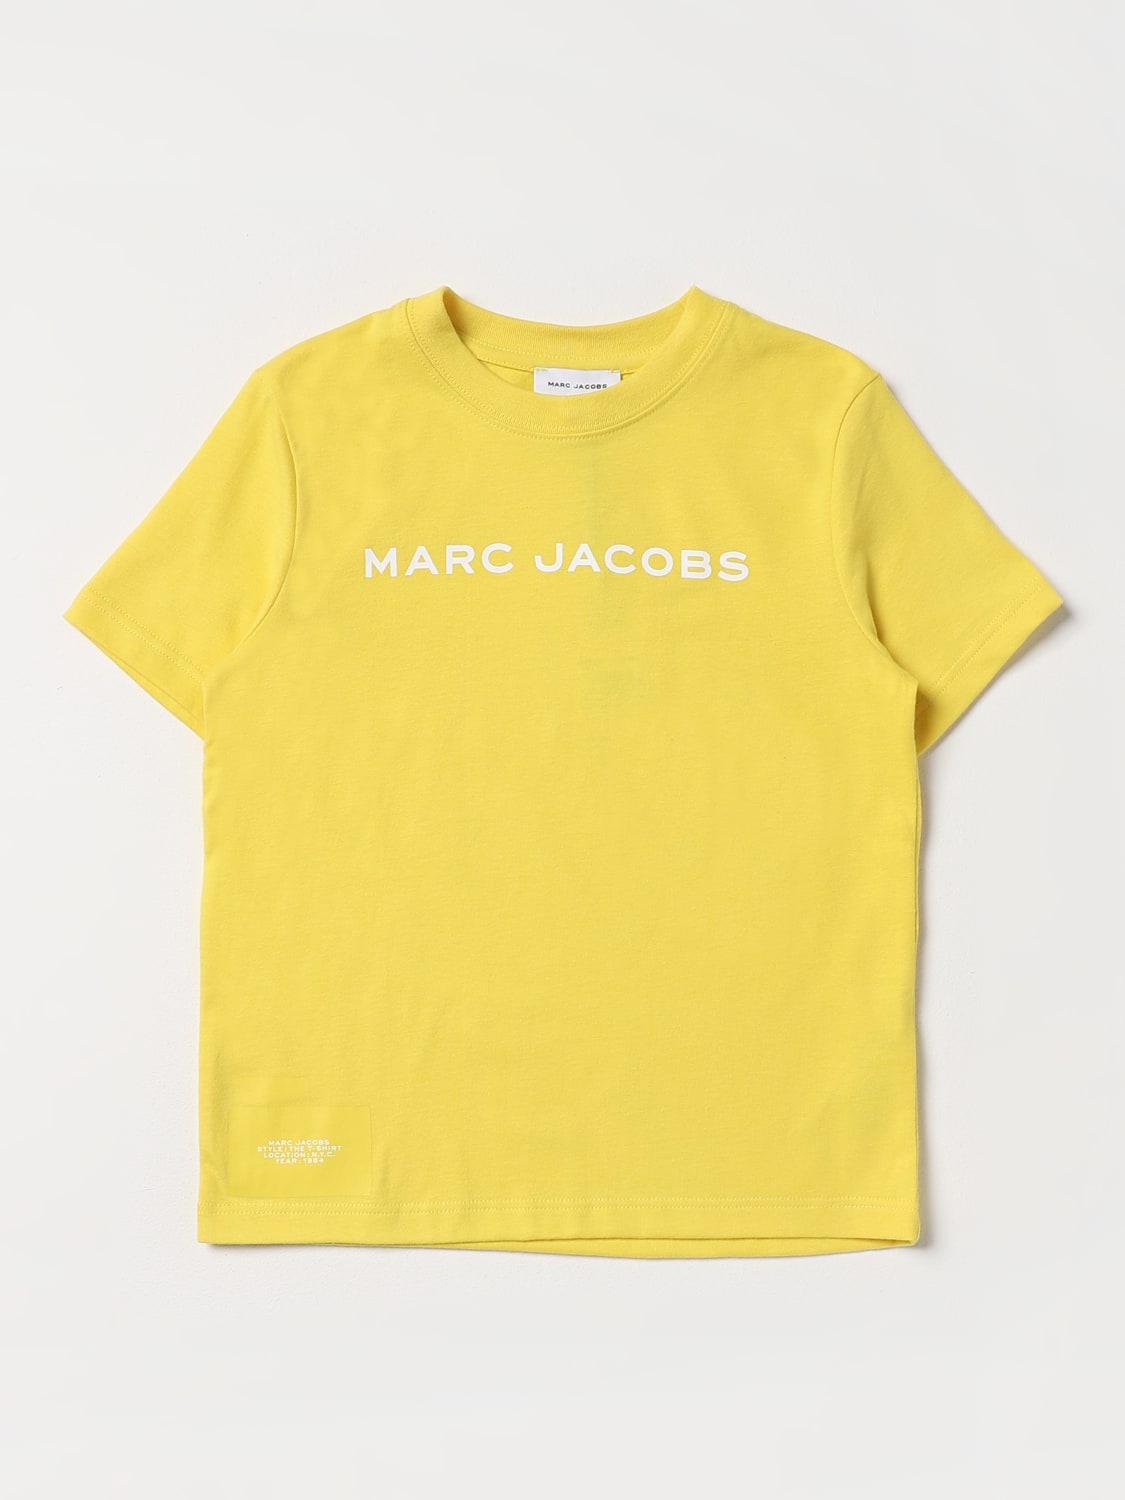 marc jacobs Tシャツ　イエロー